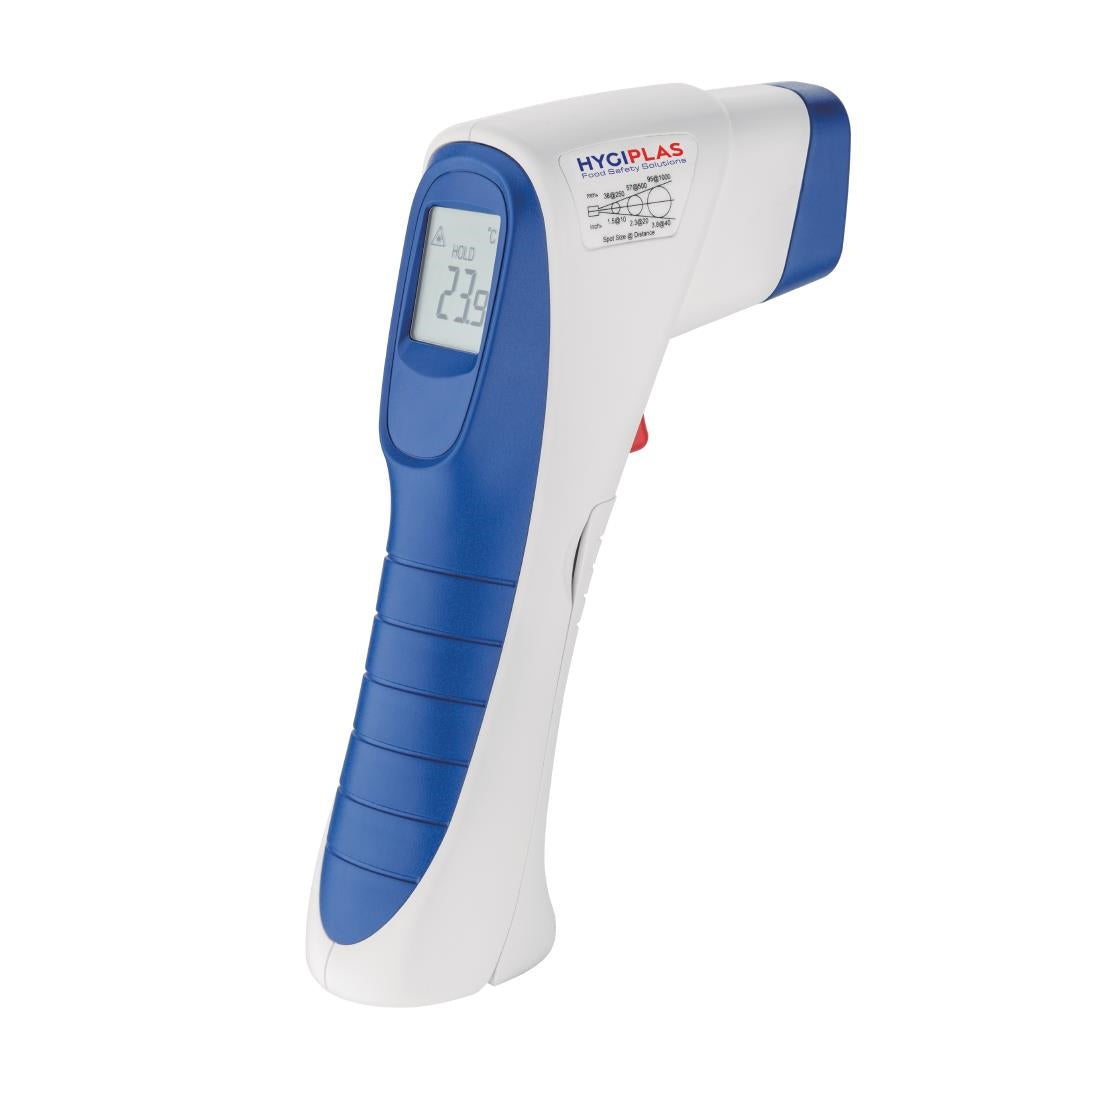 GG749 Hygiplas Infrared Thermometer JD Catering Equipment Solutions Ltd